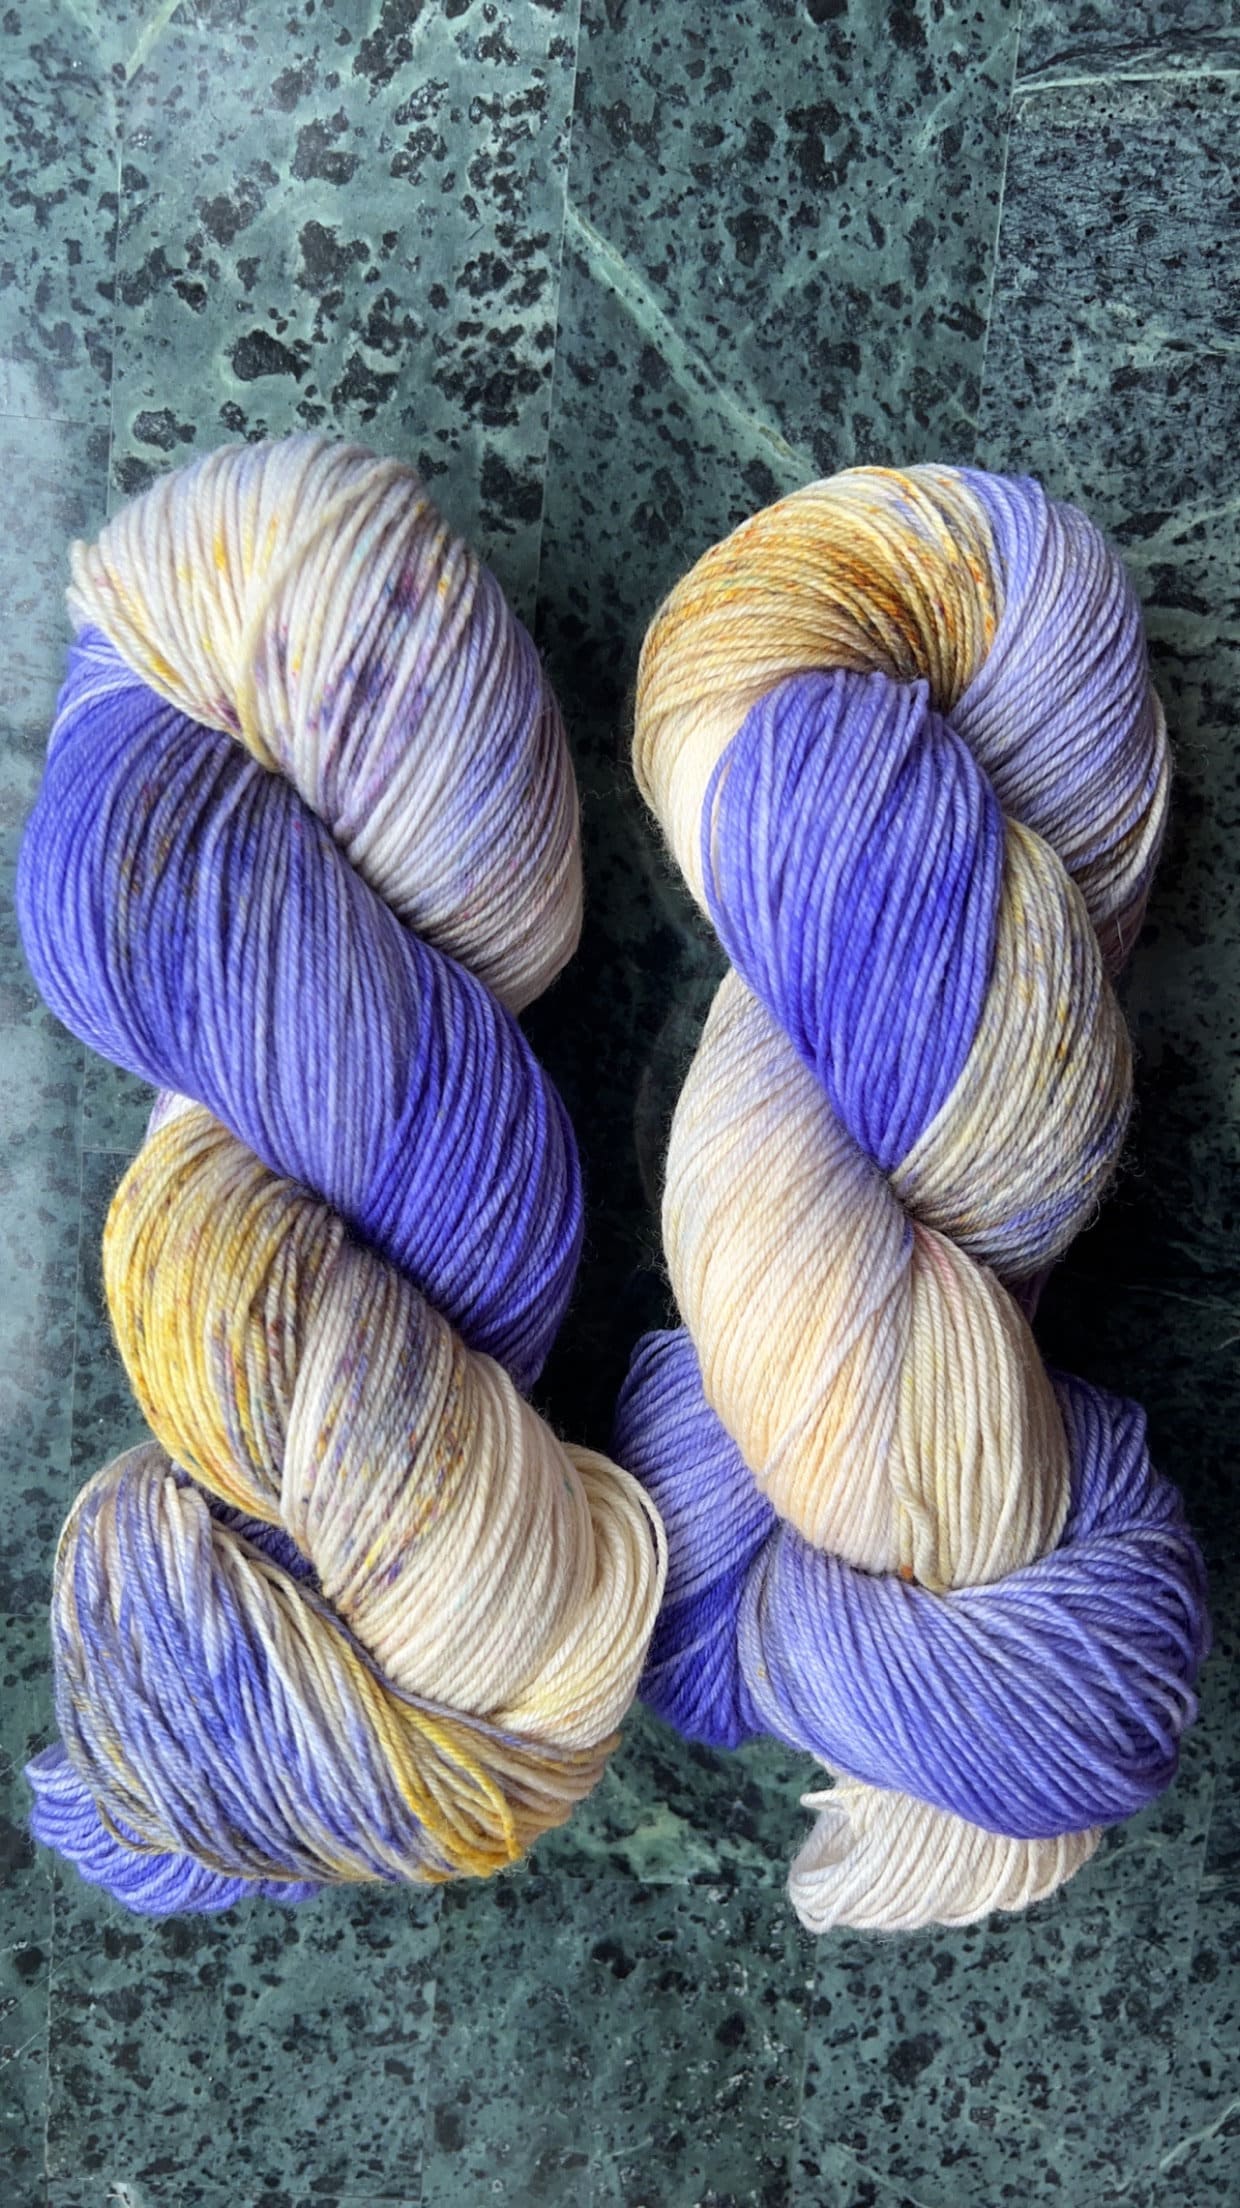 Hand-Dyed Merino Wool Yarn - Soft and Durable Yarn for Knitting and Crocheting | Indie Dyed Merino Wool | Fingering | Lavender Haze